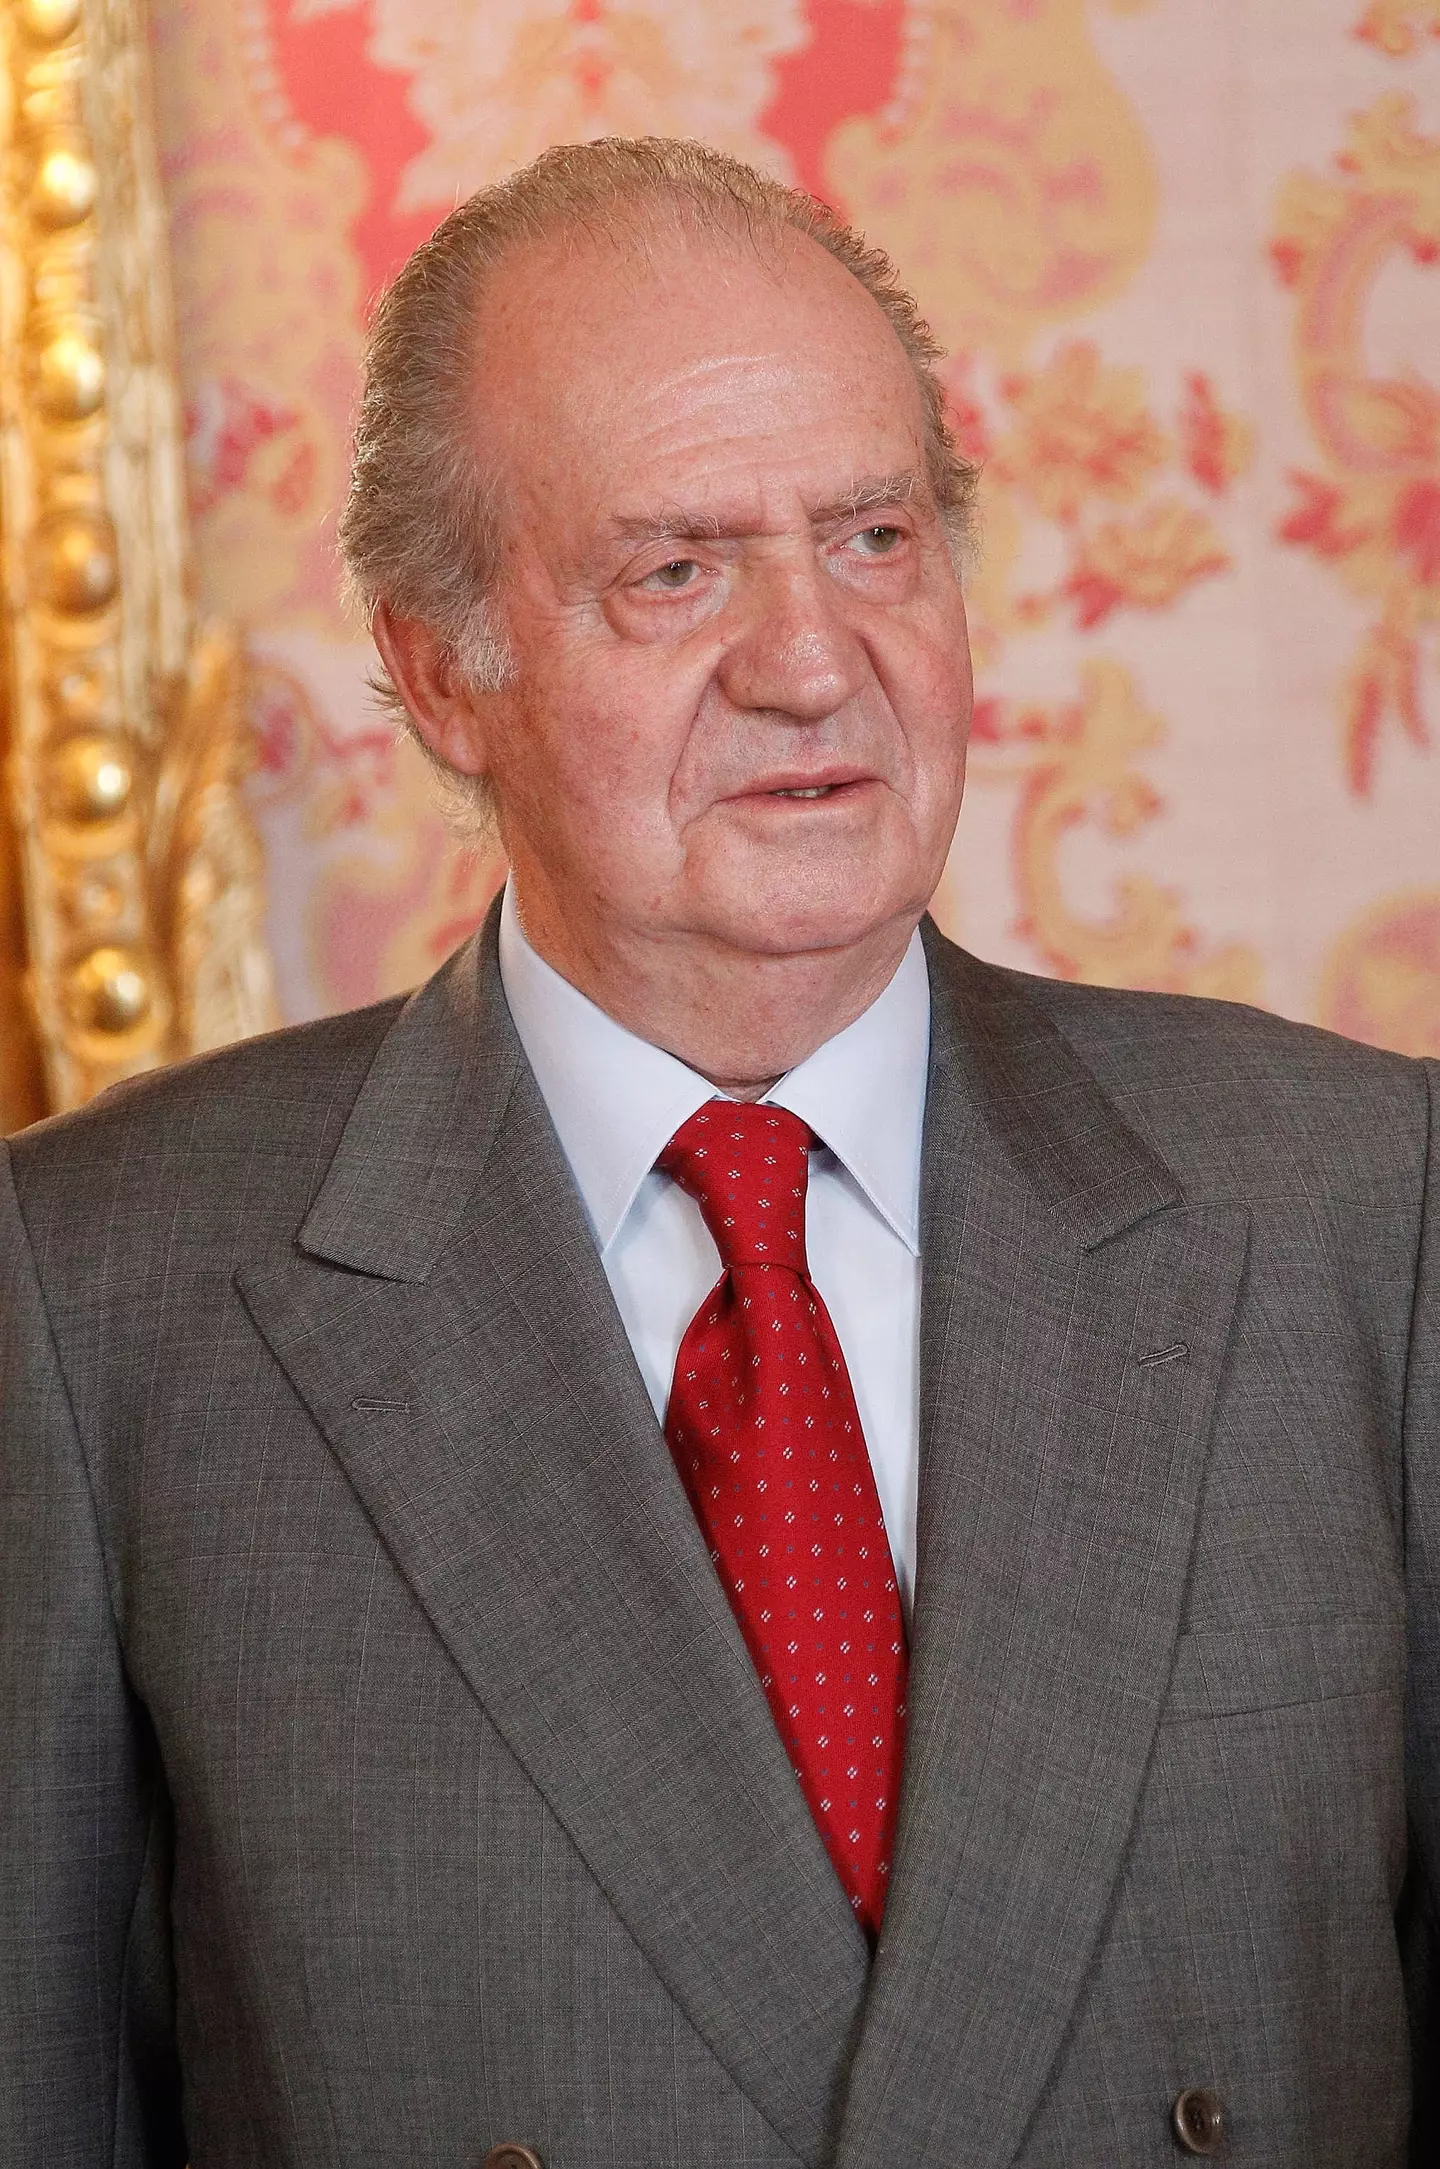 Sola claimed to be King Juan Carlos I’s illegitimate son.